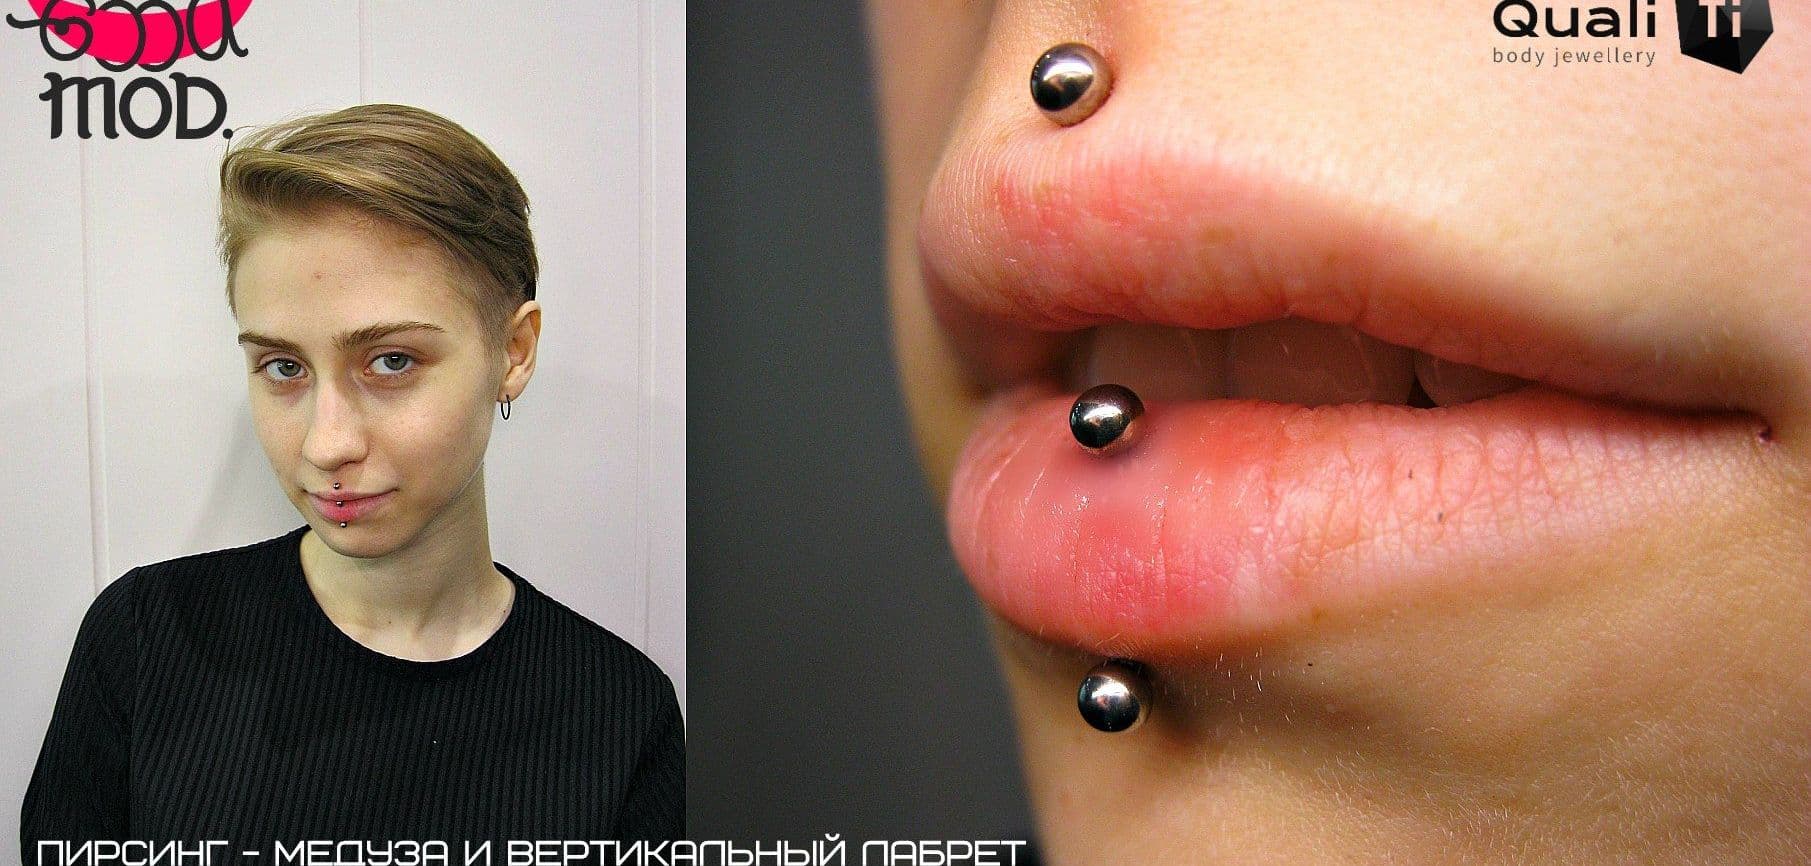 Experience the Sensual Thrill of a Bold Top Lip Piercing